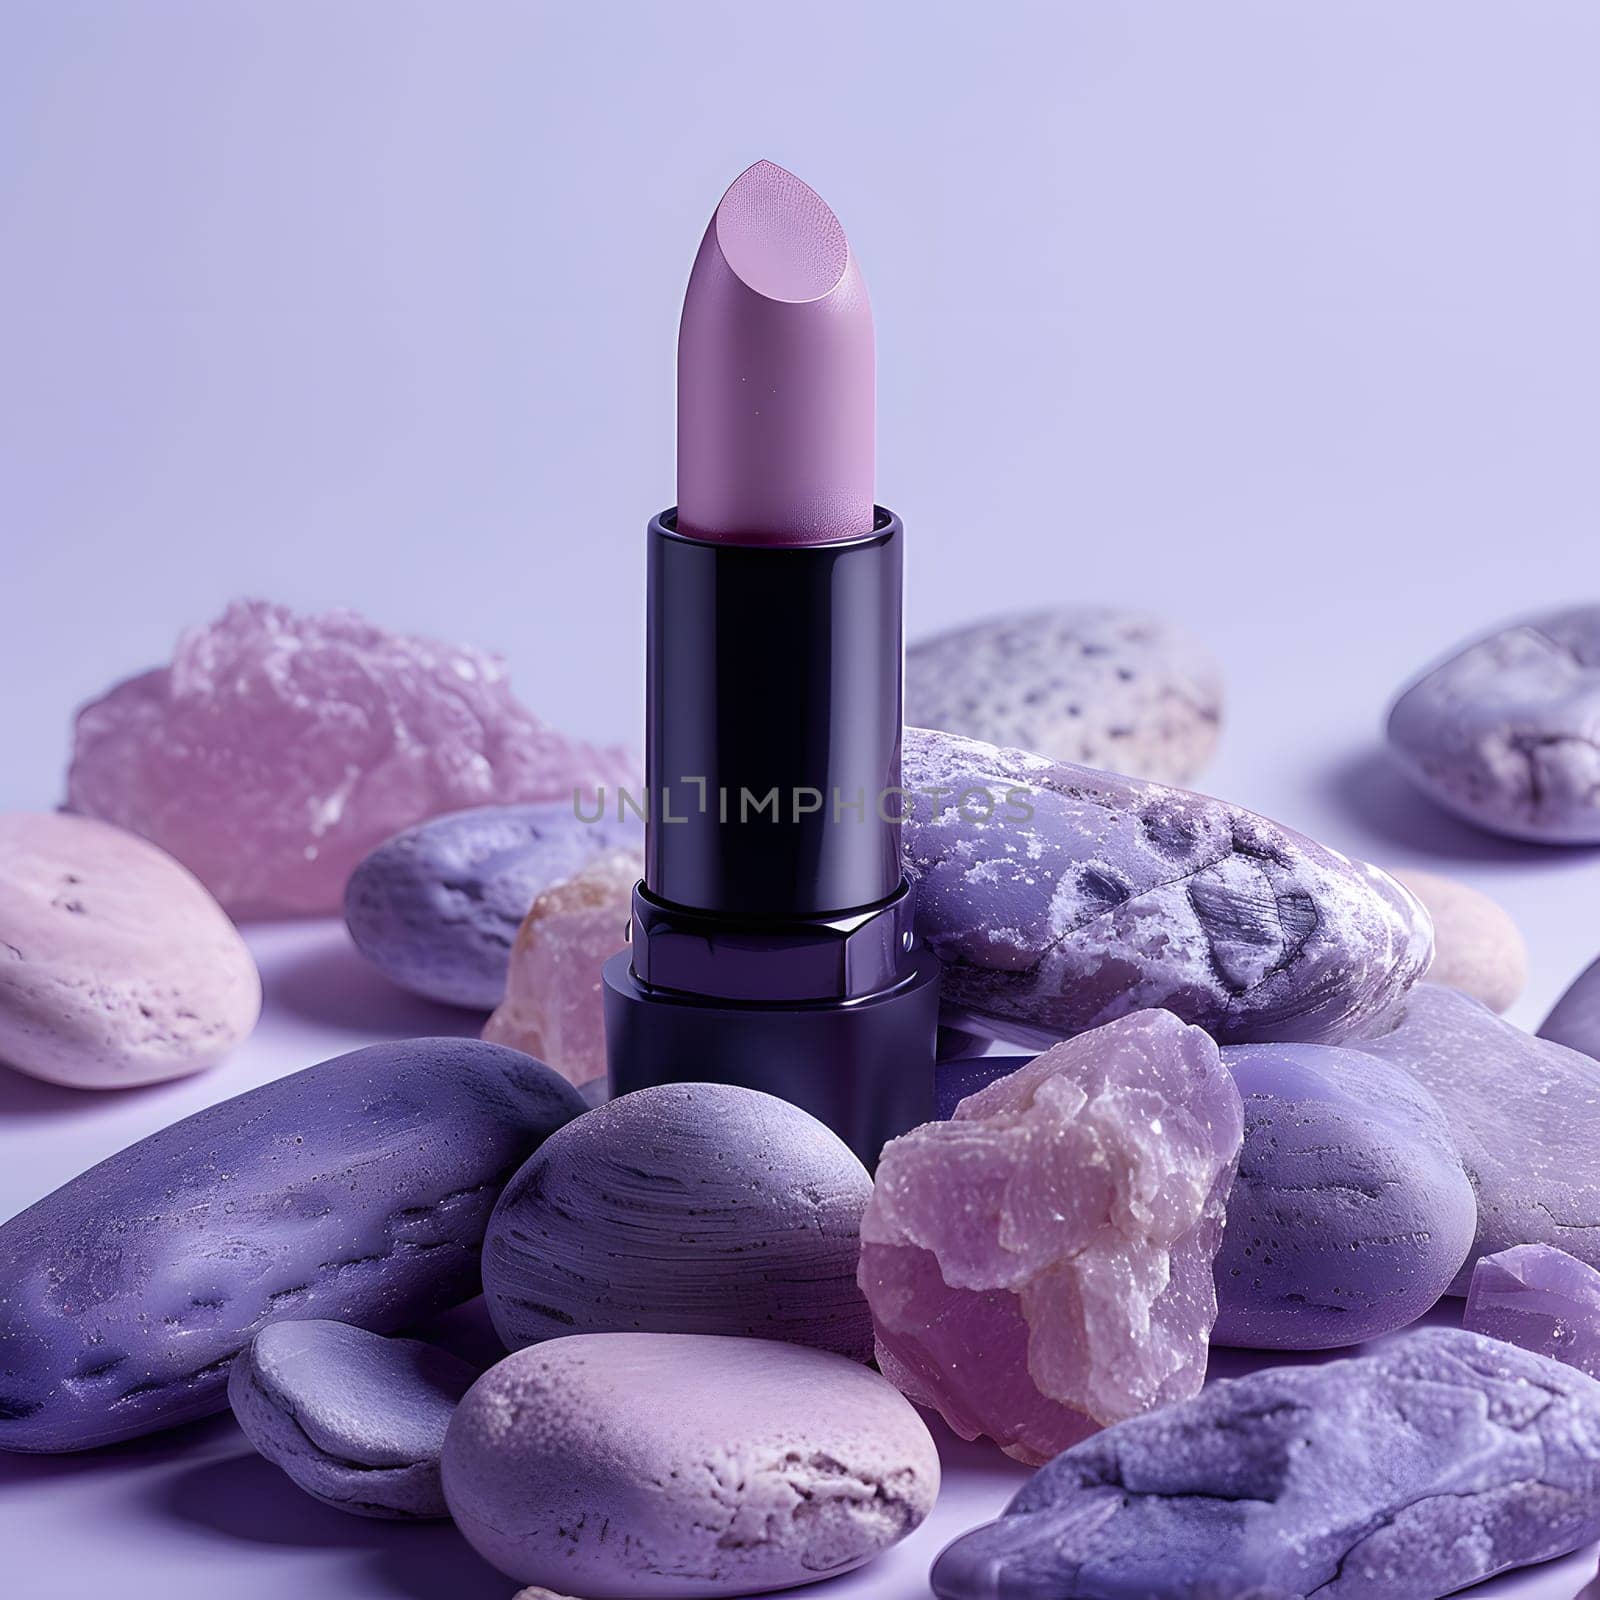 Liquid purple cosmetics surrounded by violet rocks by Nadtochiy